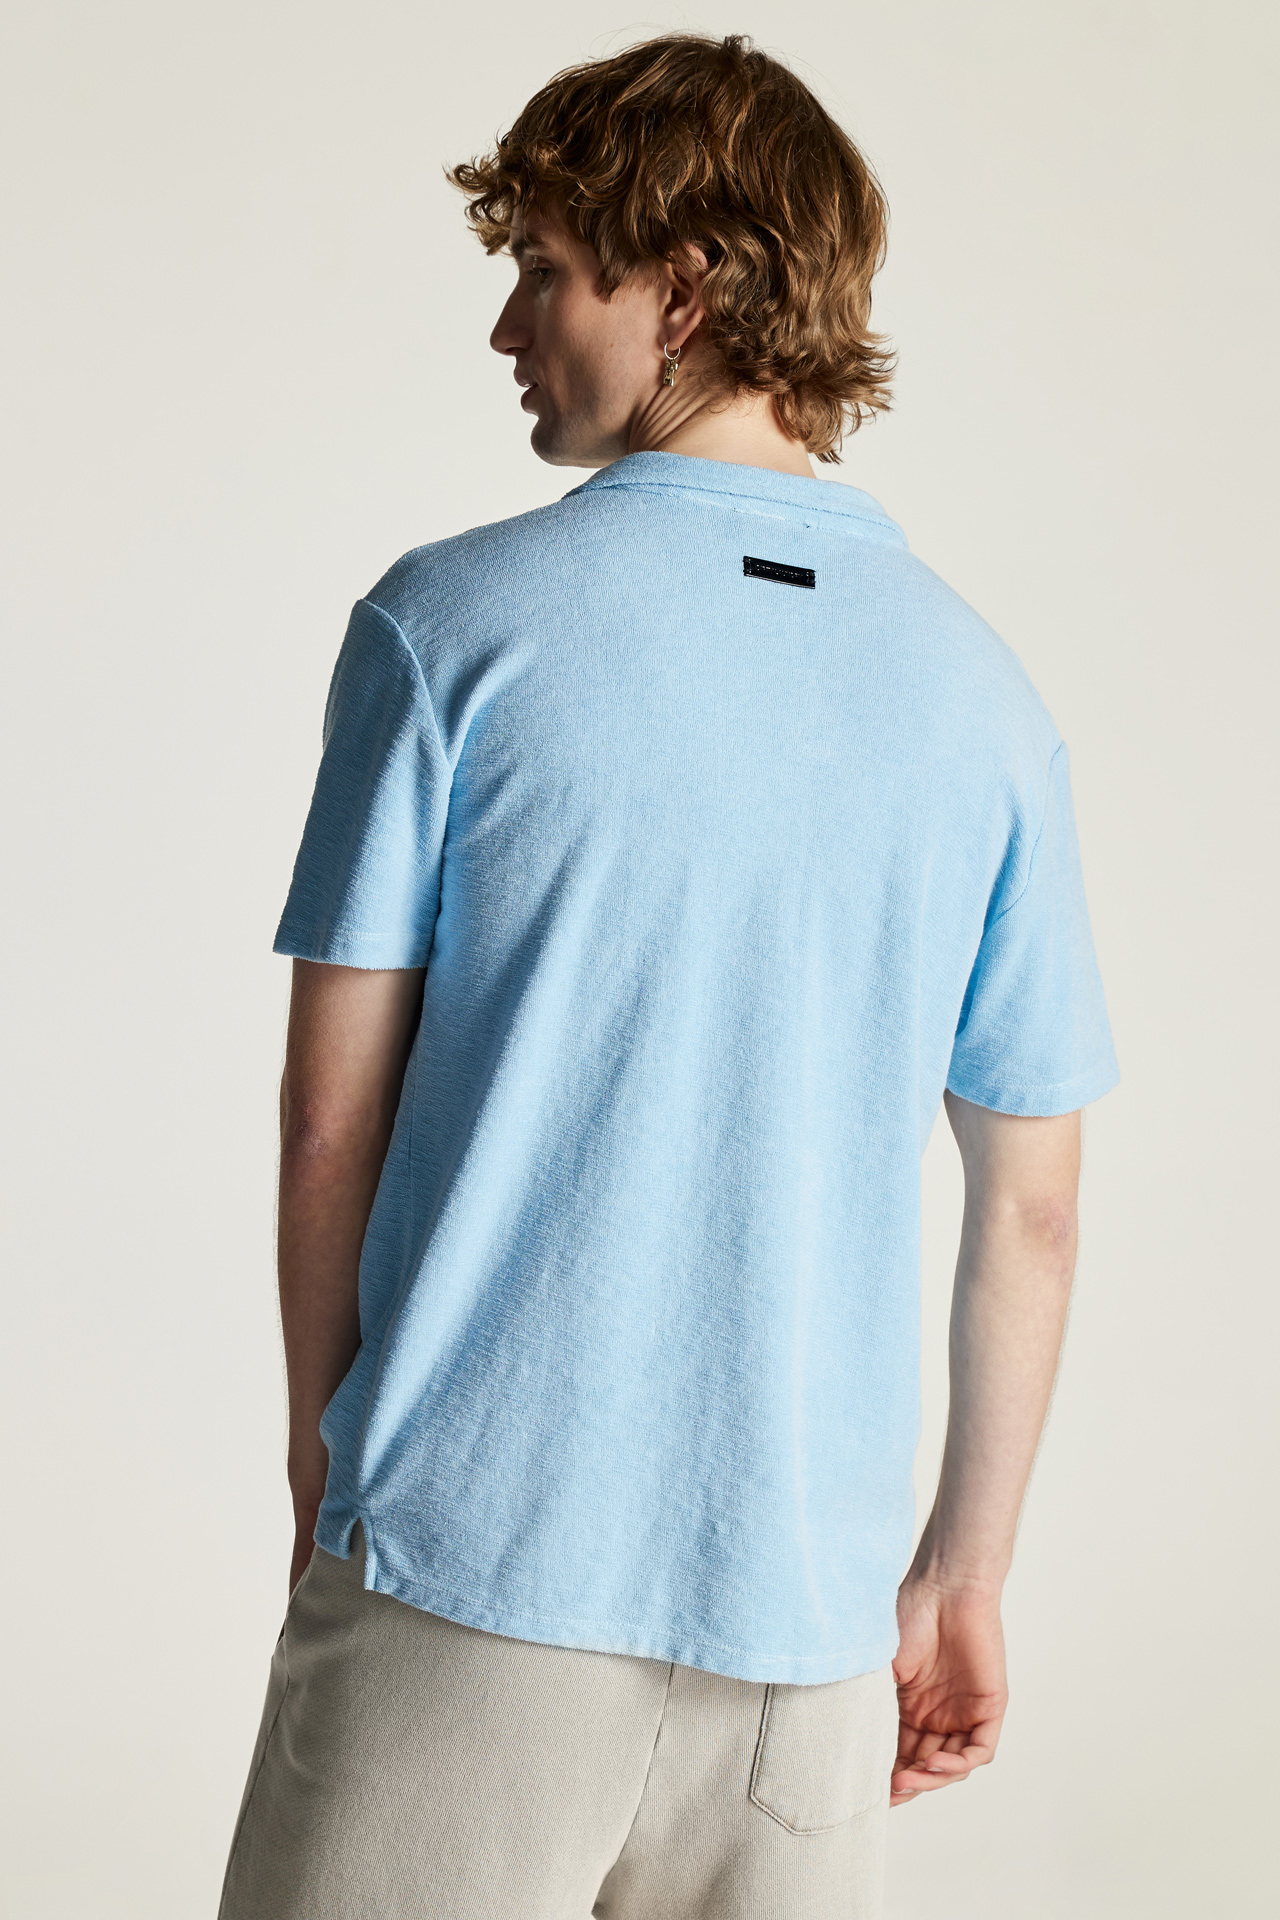 Terry Towel Regular Fit Polo Tee